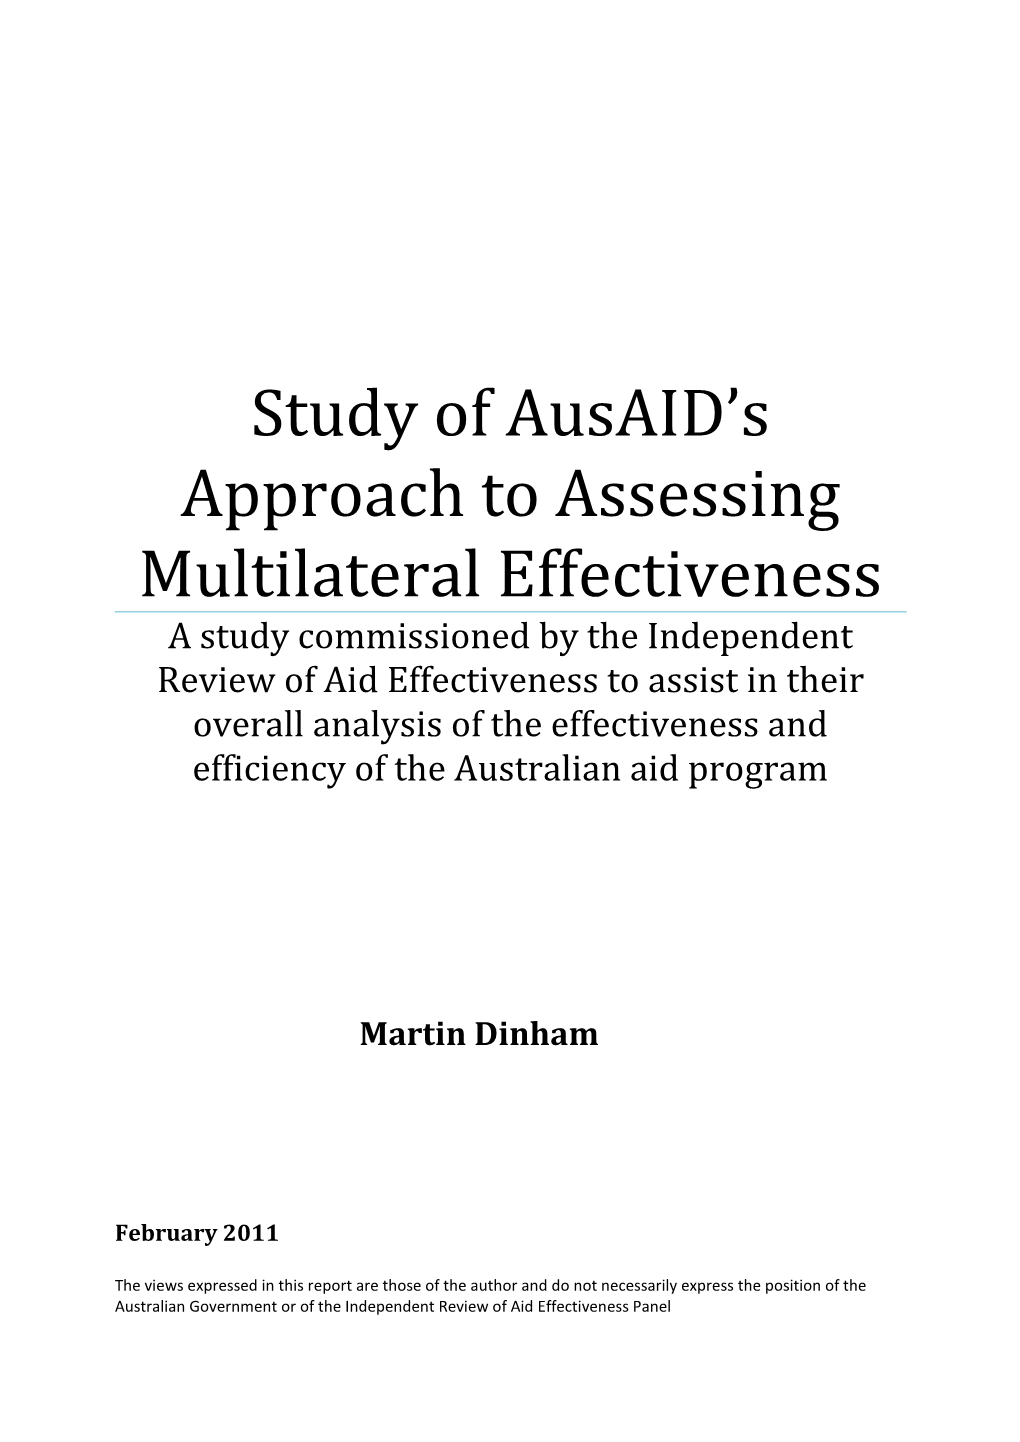 Study of Ausaid's Approach to Assessing Multilateral Effectiveness